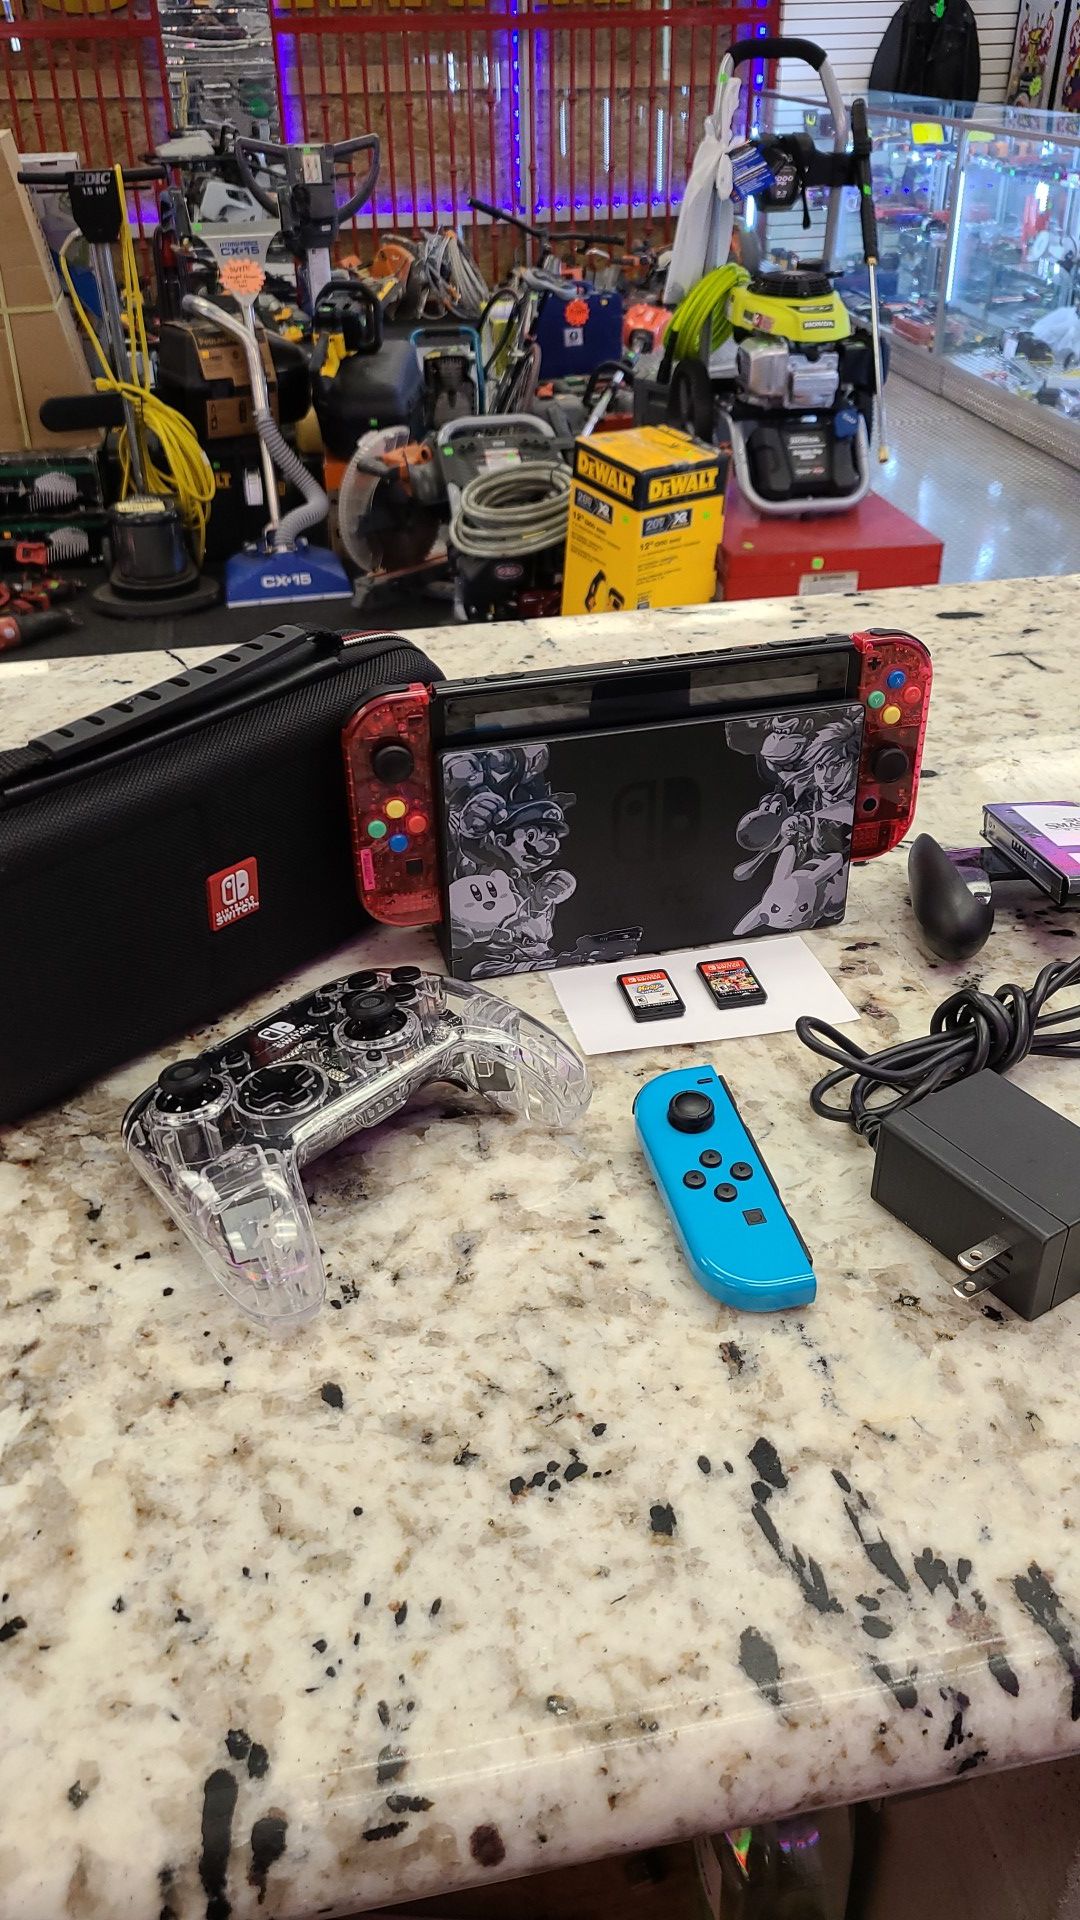 Nintendo Switch with Games and extra remotes